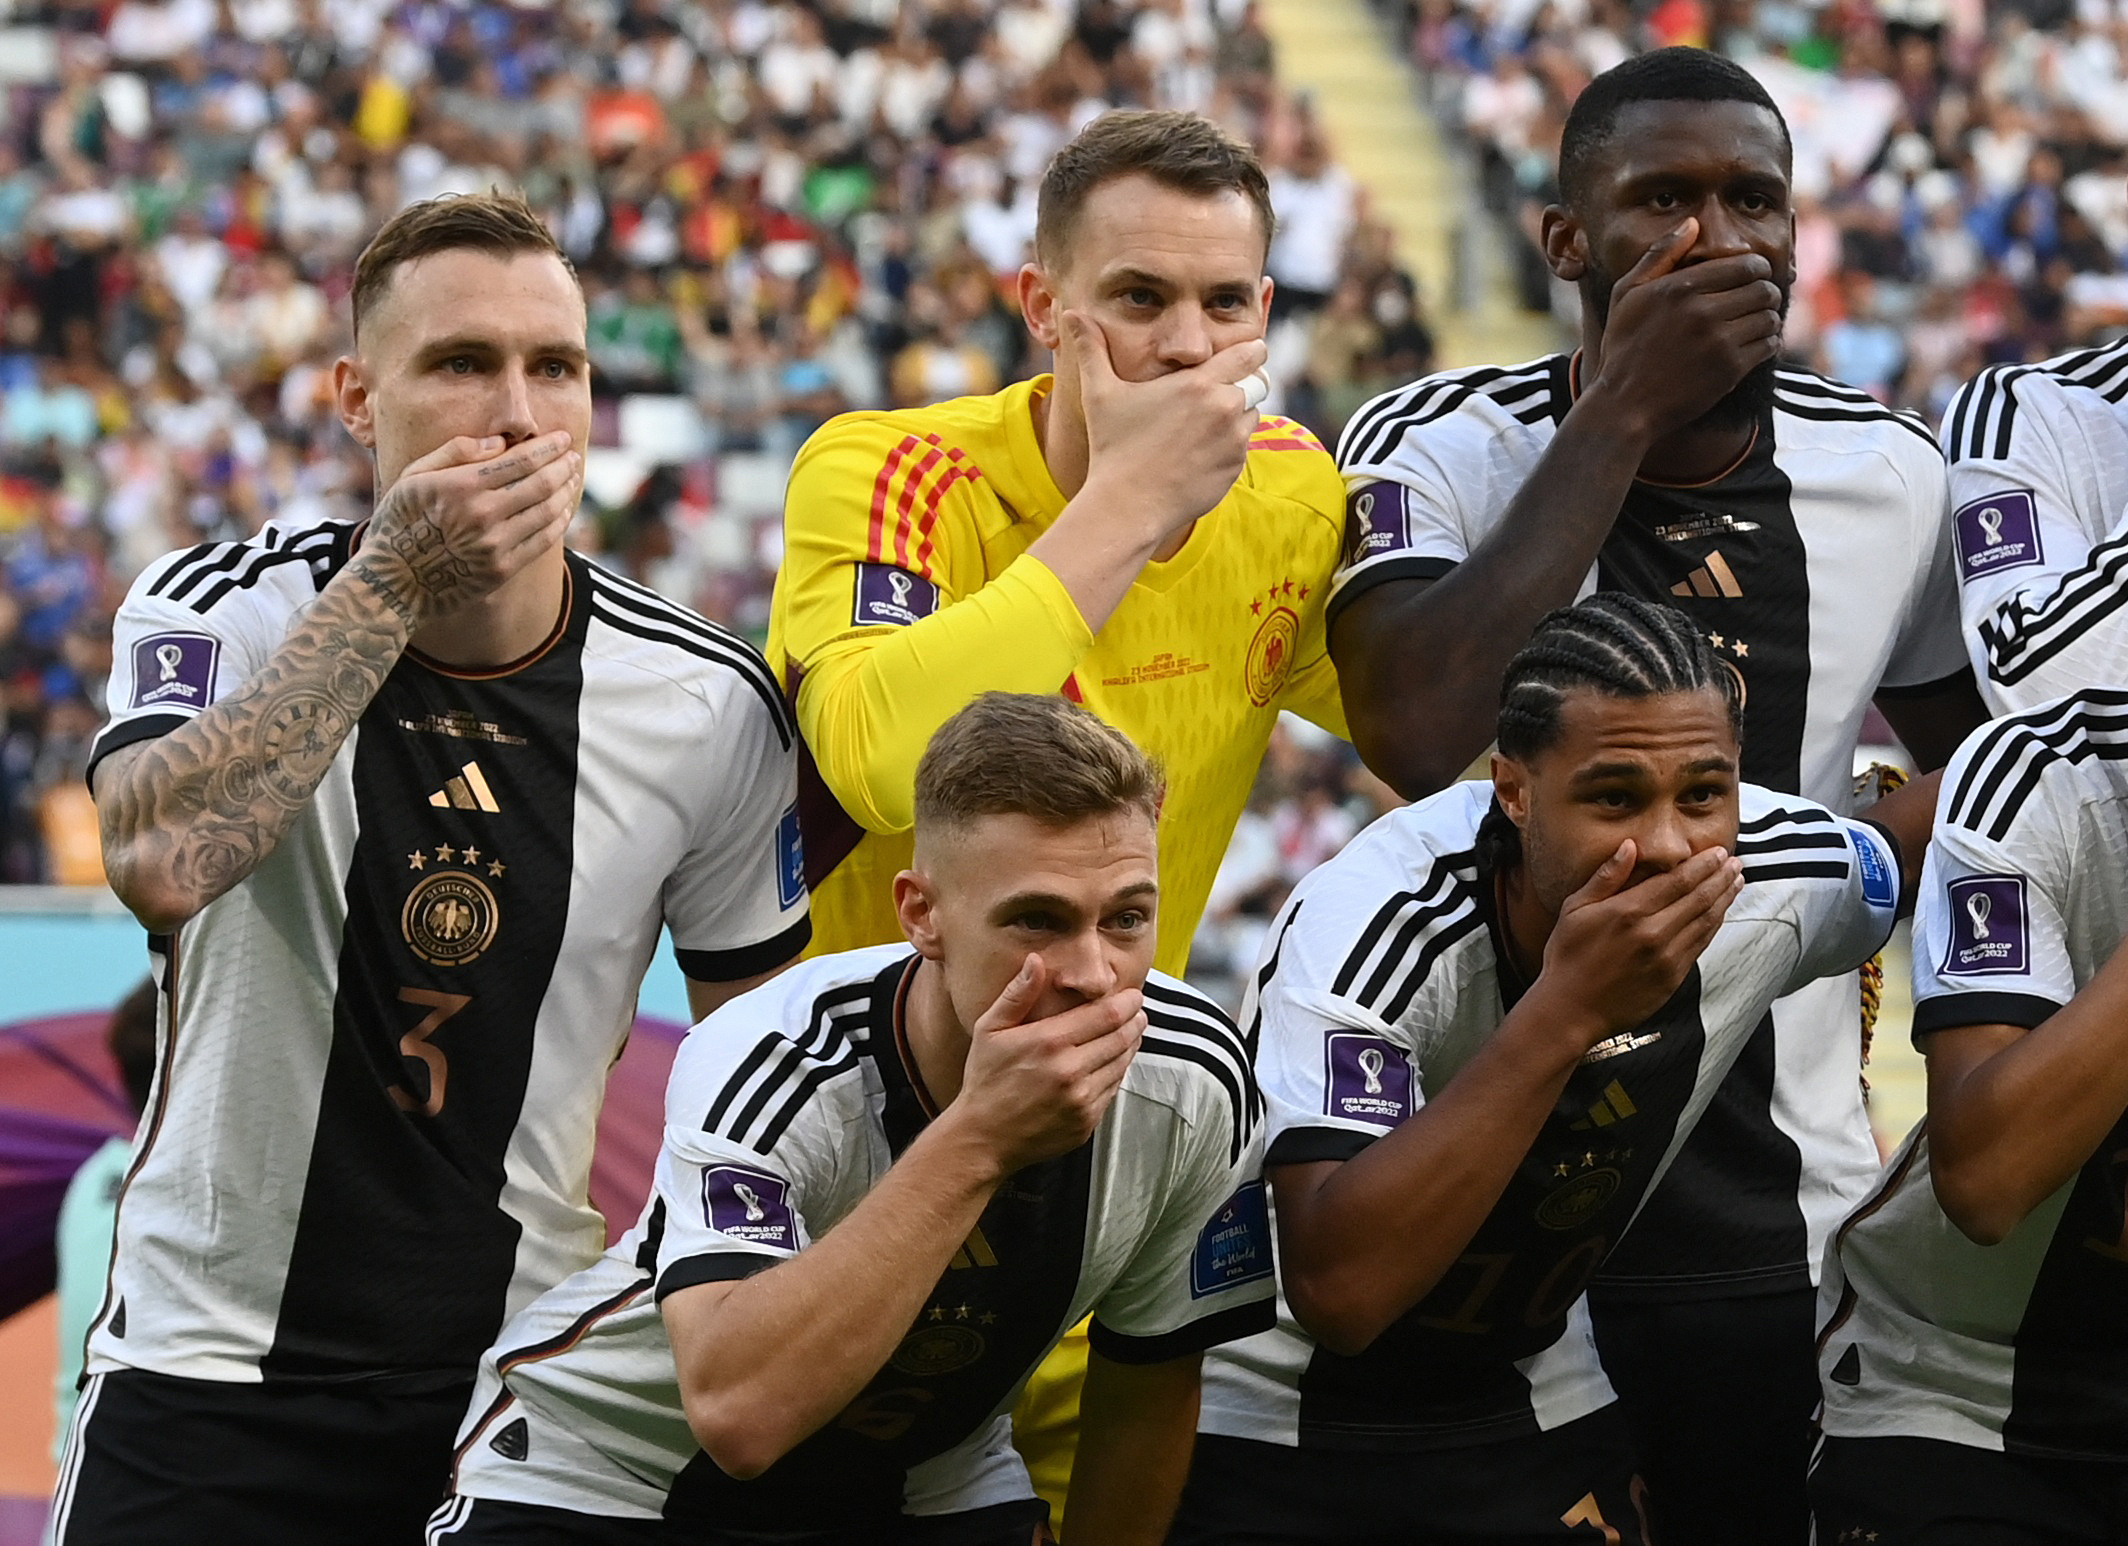 Germany players cover mouths in team photo amid armband row at World Cup